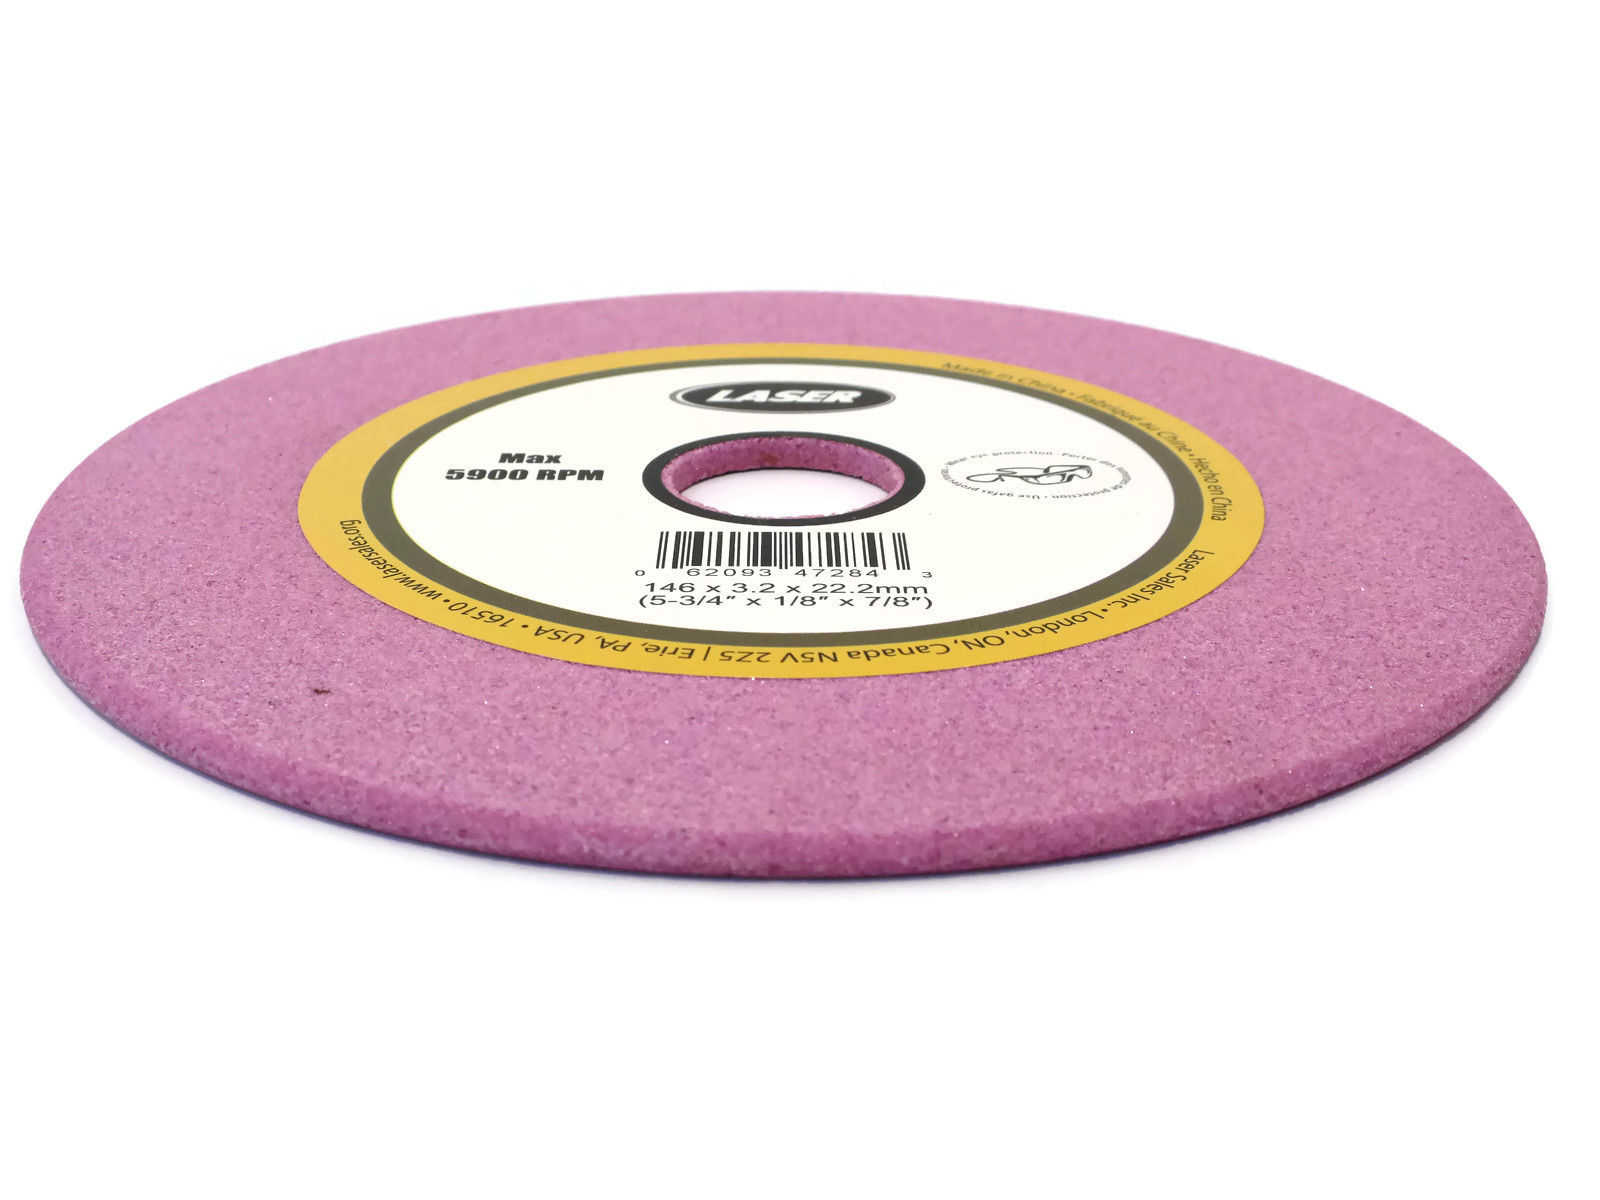 GRINDING WHEEL 1/8' 3mm Thick for Chain Grinder Sharpener 5 3/4' x 1/8' x 7/8' by The ROP Shop